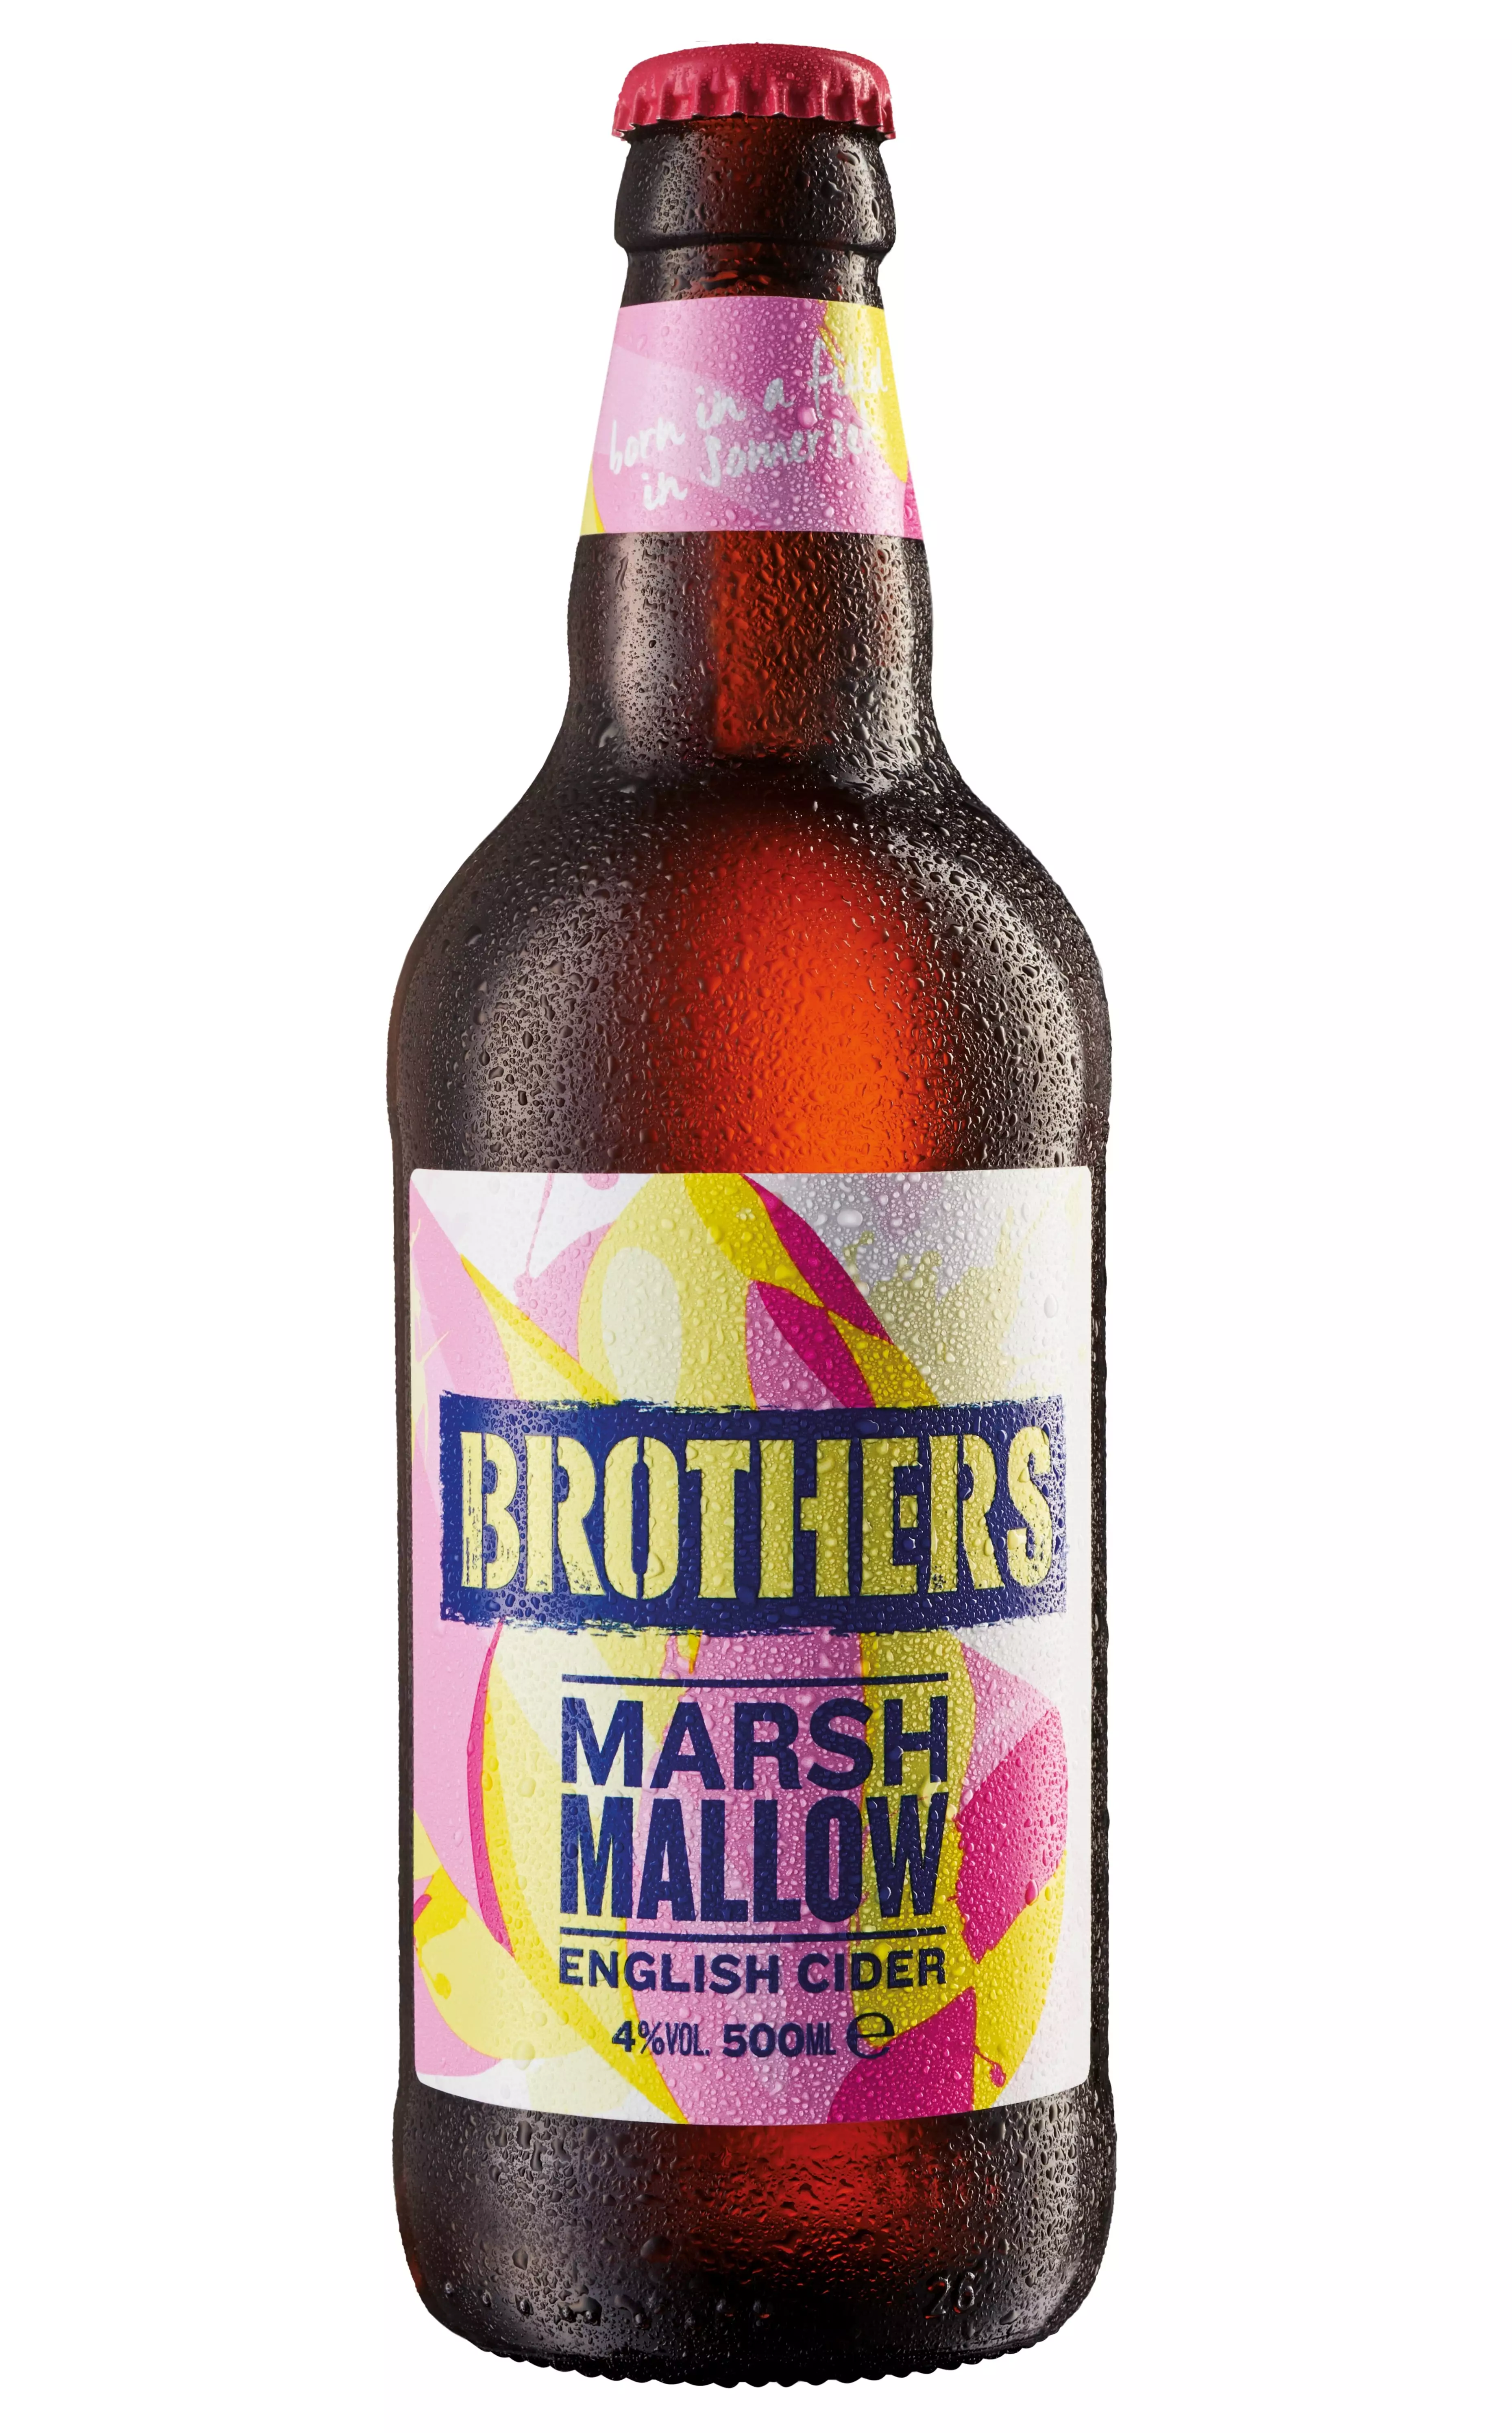 Marshmallow flavour is a distinctive concoction of (you guessed it) marshmallow and sweet vanilla (